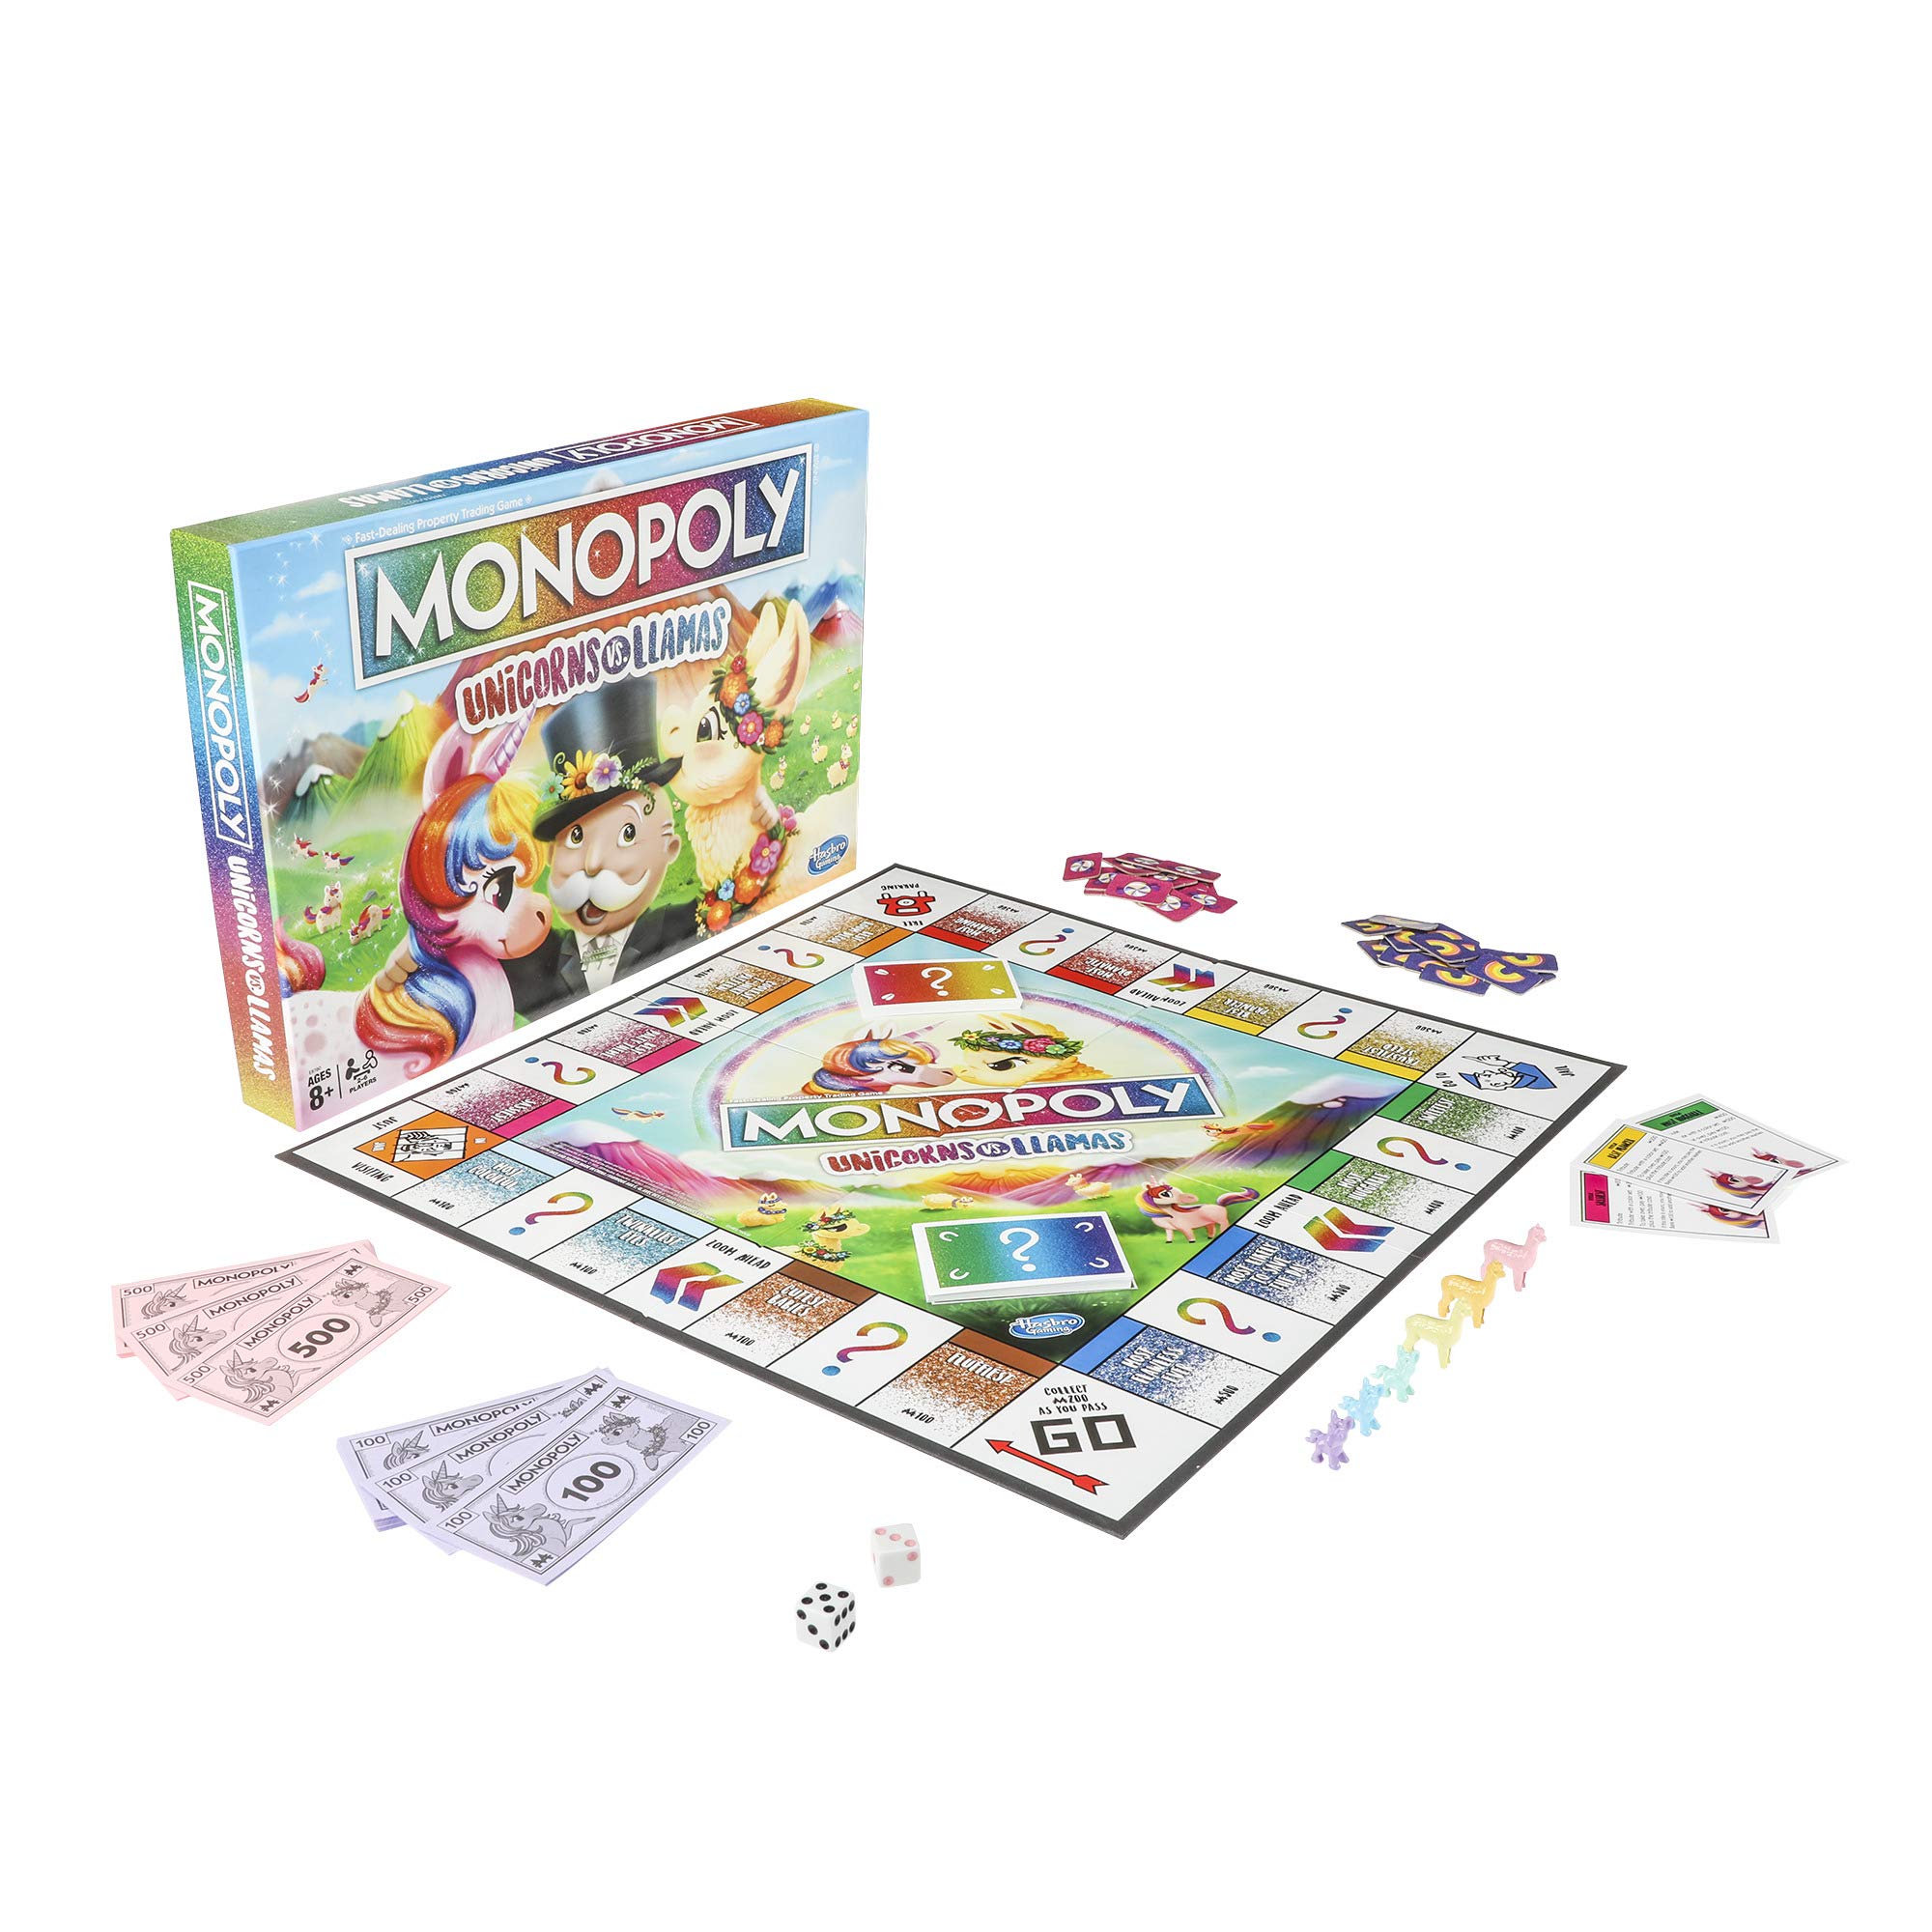 Monopoly Unicorns vs. Llamas Board Game for Ages 8 and up, Play on Team Unicorn or Team Llama [Amazon Exclusive] - Amazon Exclusive